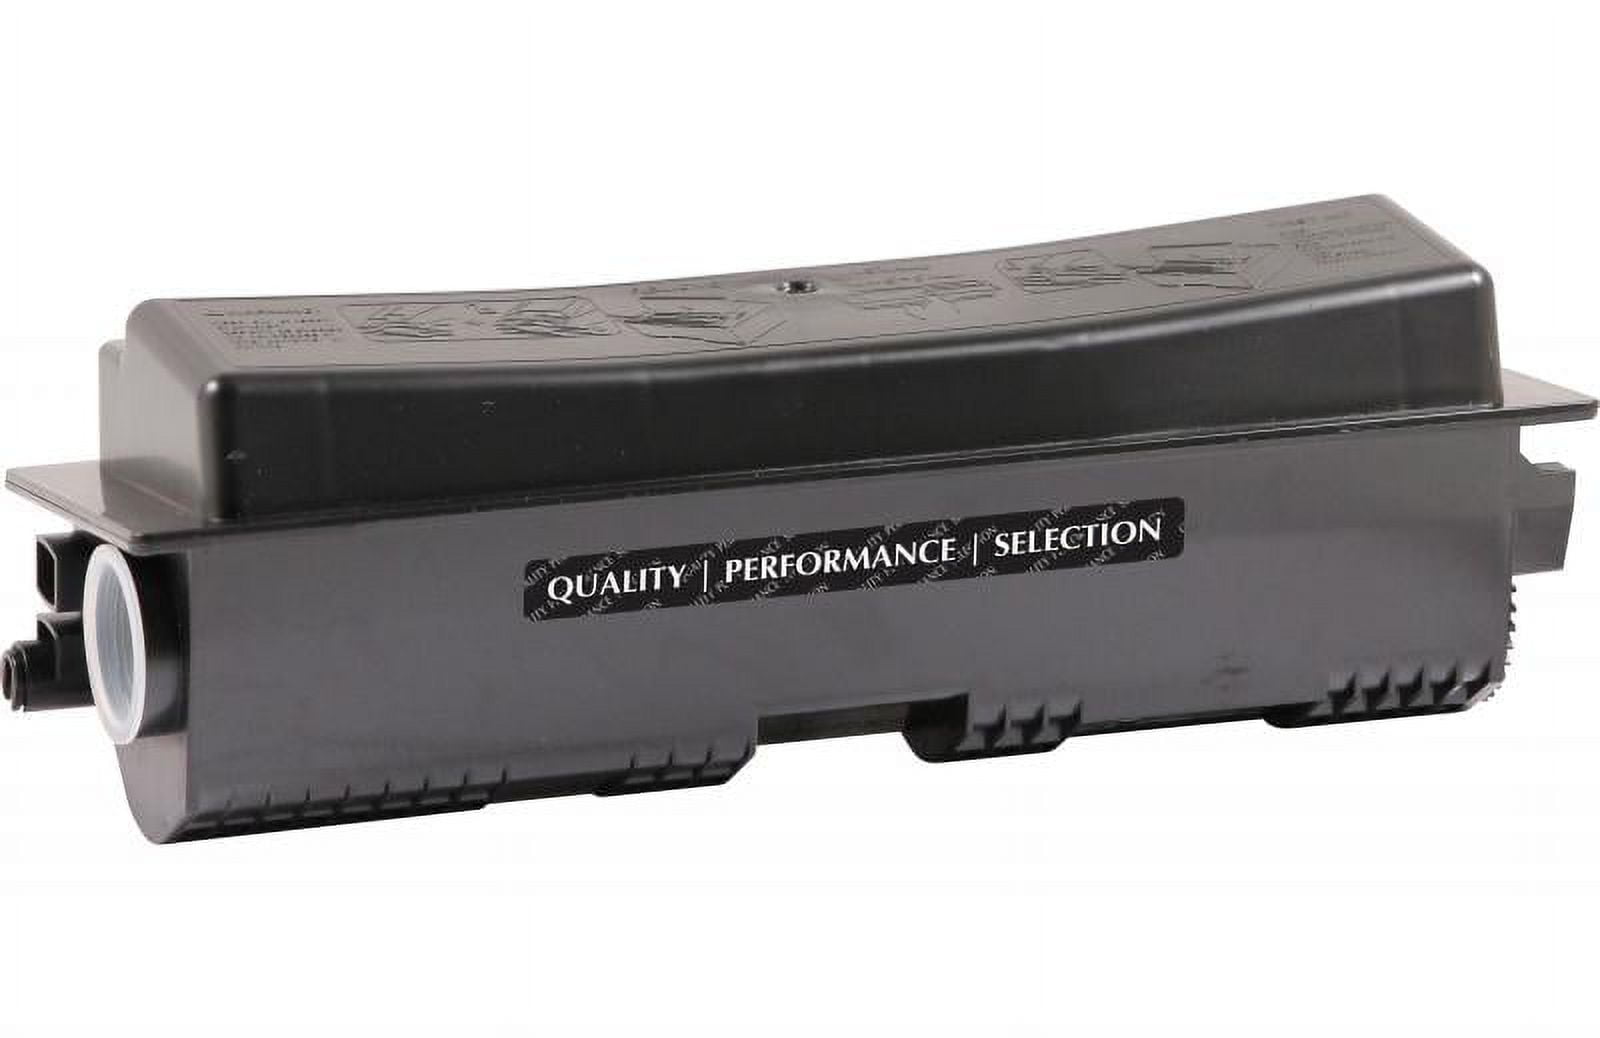 Picture of CIG 201005 Non-New Toner Cartridge for Kyocera TK-172